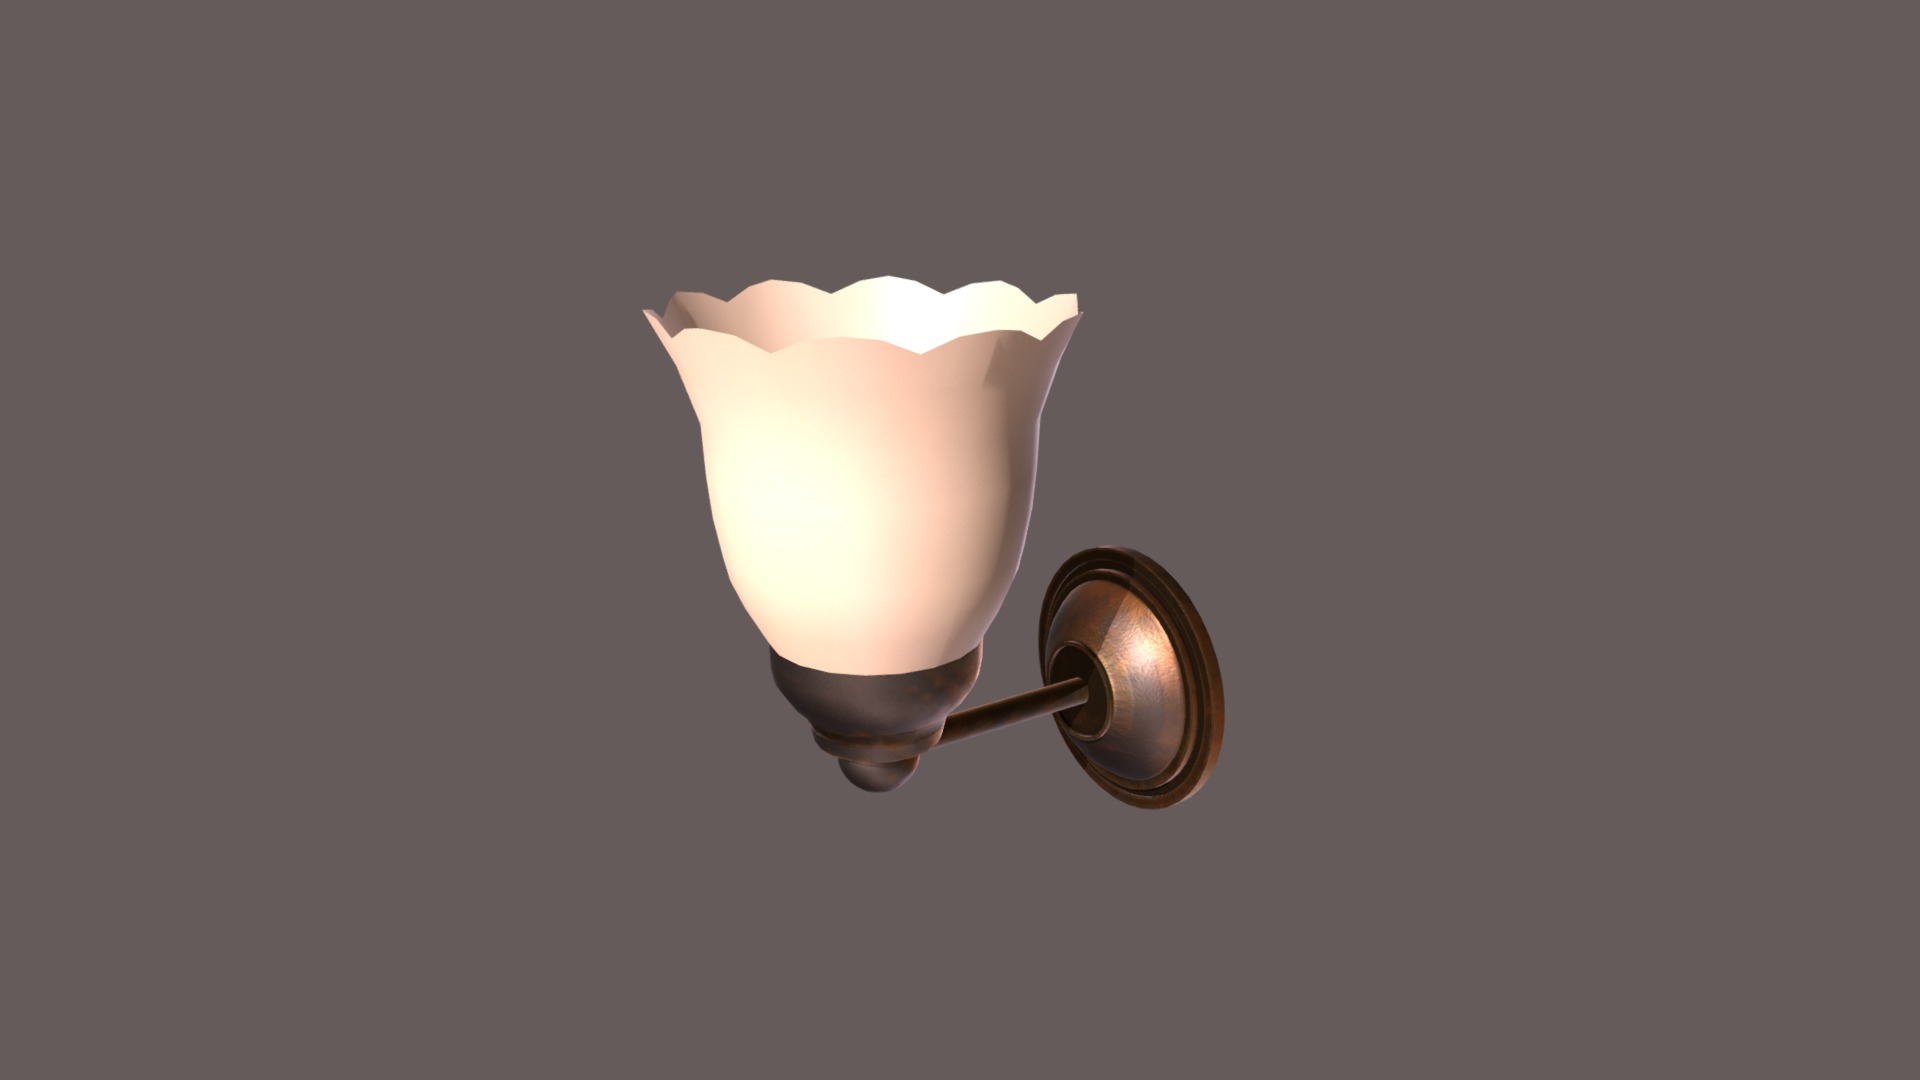 3D model Wall Lamp - This is a 3D model of the Wall Lamp. The 3D model is about a light bulb on a black background.